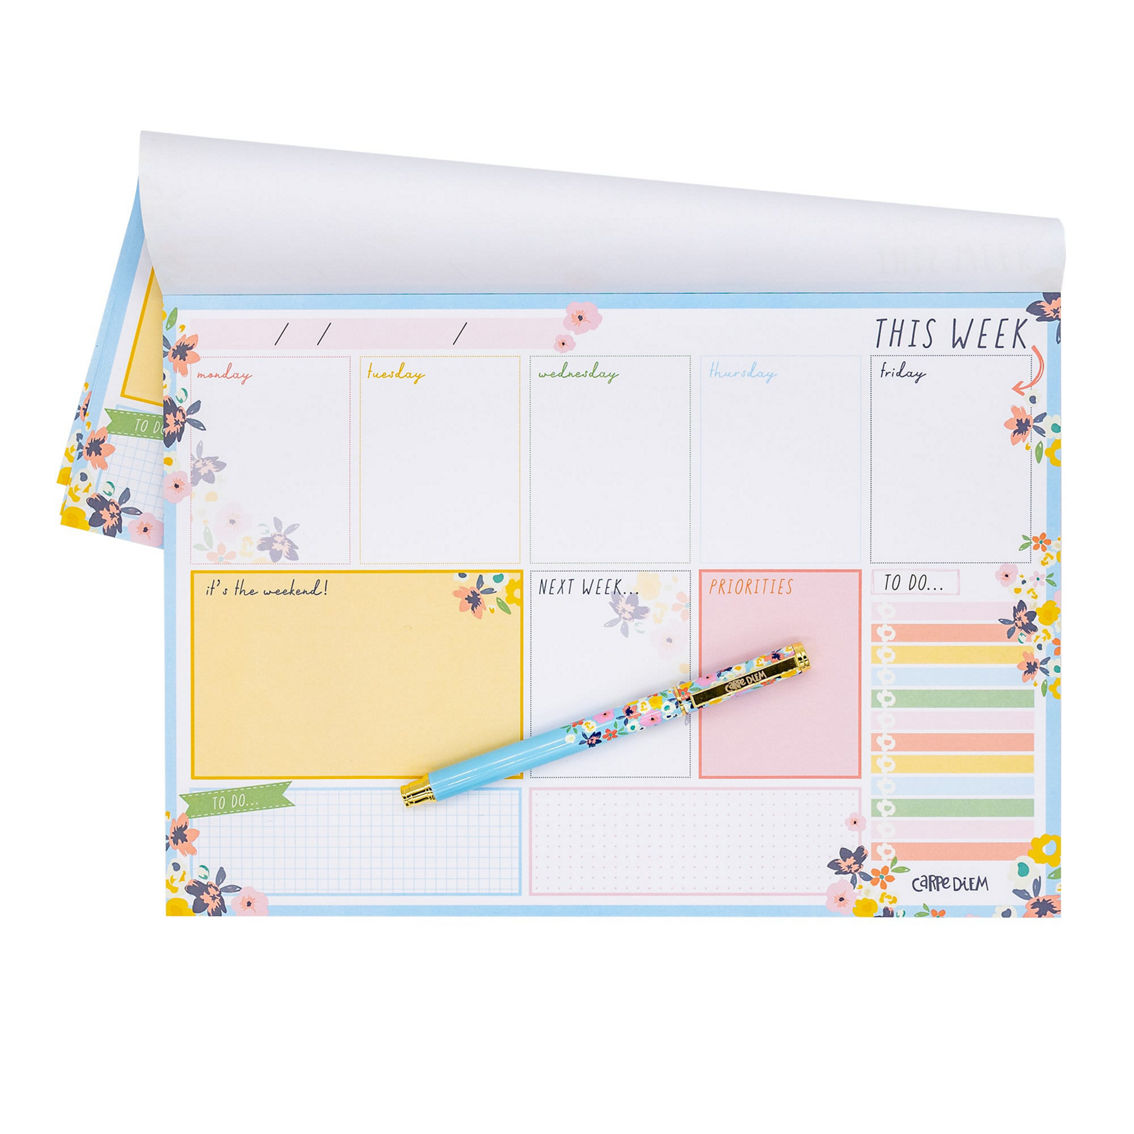 Pukka Pads Weekly Planner Pad, Ditzy Floral, Pack 6 - Image 2 of 4